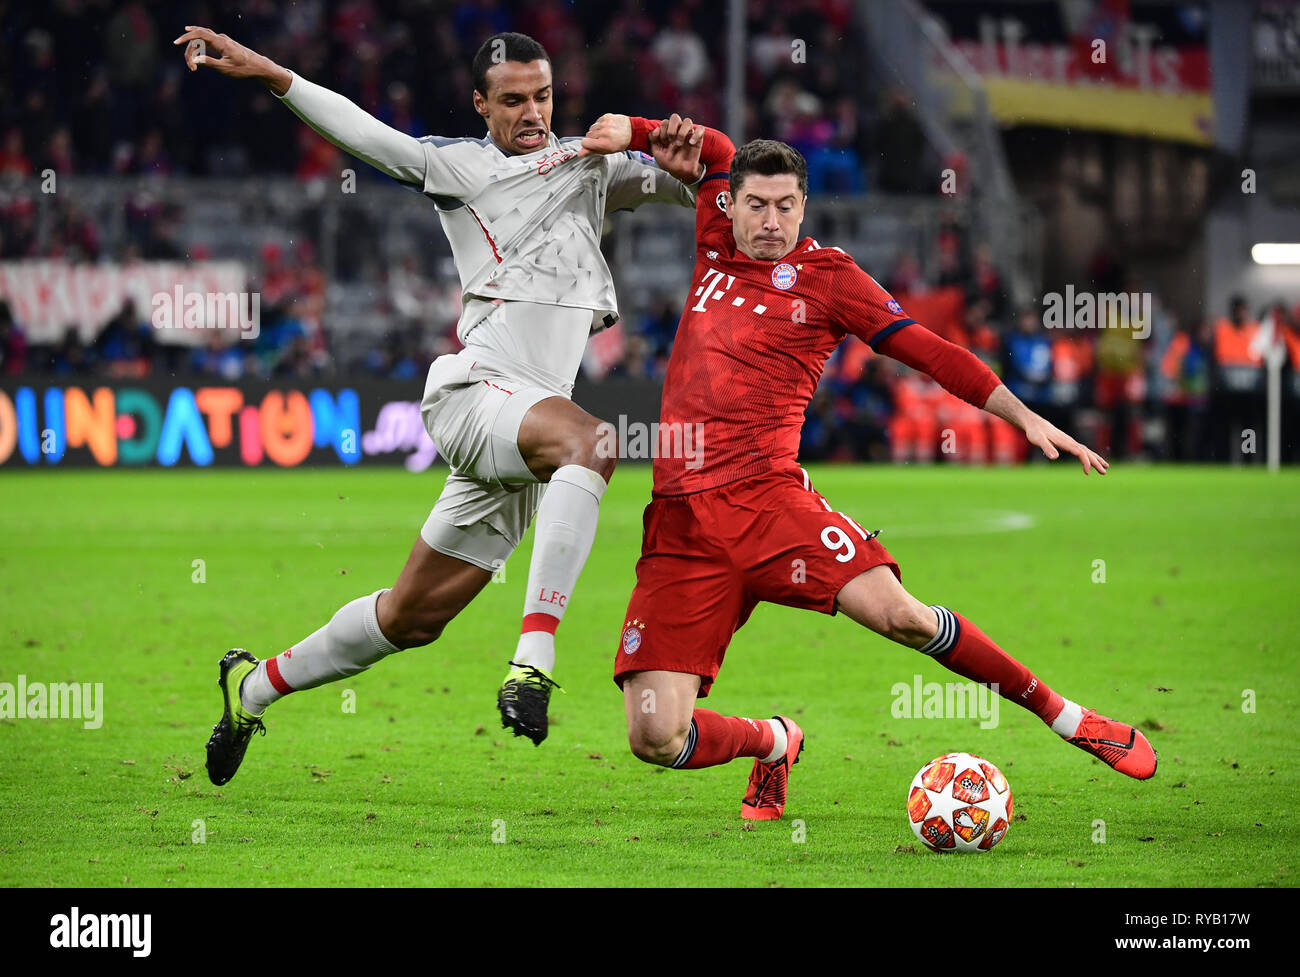 Munich, Germany. 13th Mar, 2019. Soccer: Champions League, knockout round, round of sixteen, second leg: FC Bayern Munich - FC Liverpool in the Allianz Arena. Munich's Robert Lewandowski (r) and Liverpool's Joel Matip fight for the ball. Credit: Peter Kneffel/dpa/Alamy Live News Stock Photo